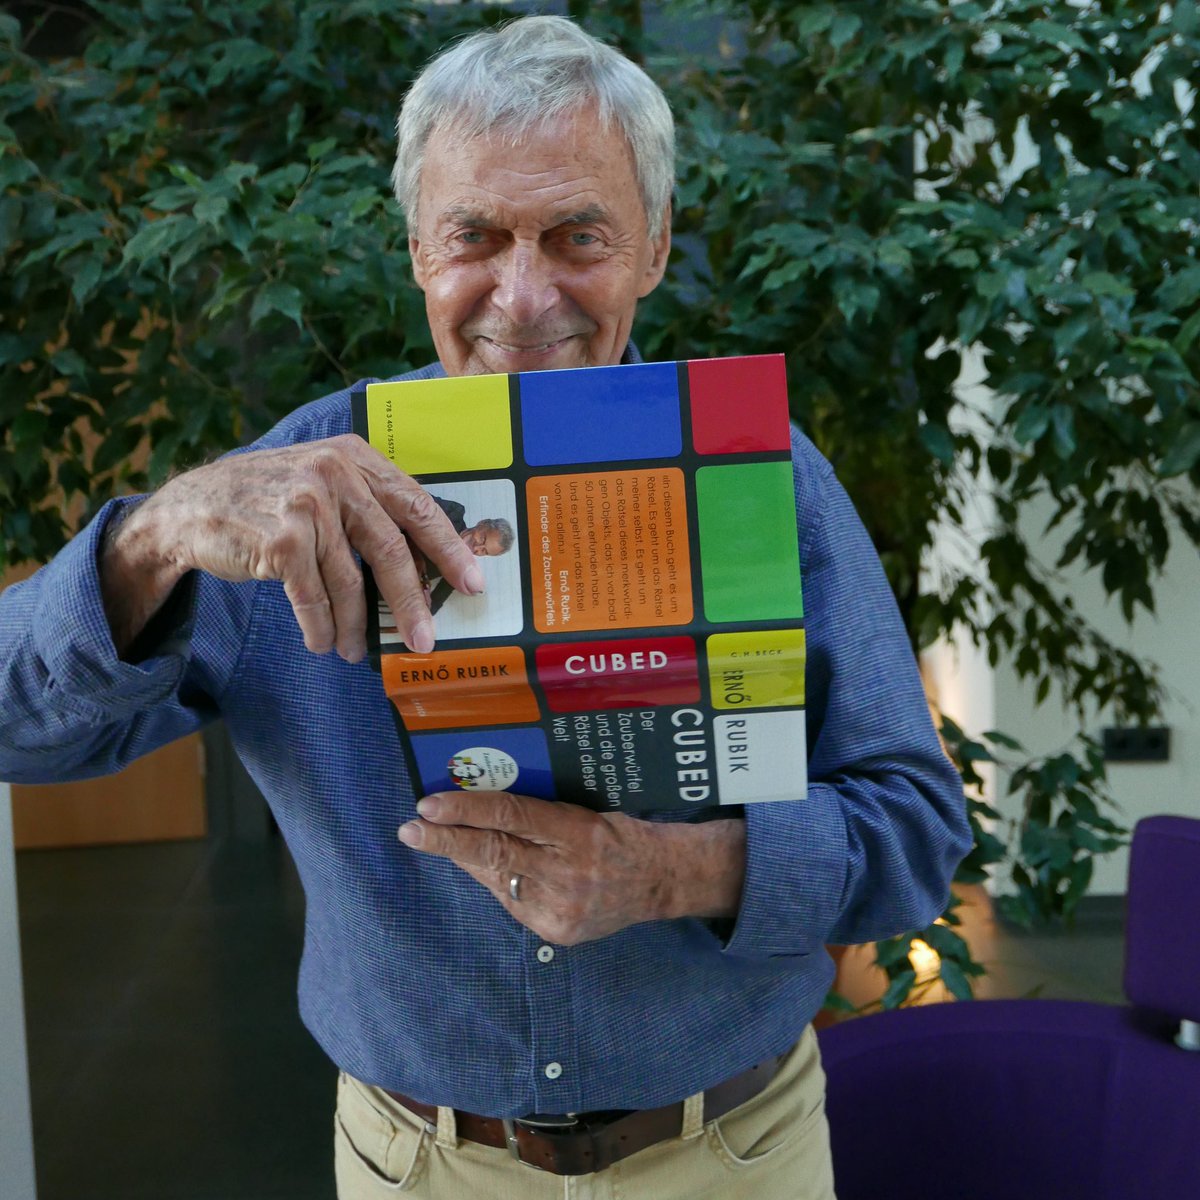 Happy Birthday to our inventor Ernő Rubik ! 

Let’s celebrate Ernő today and reply with your birthday wishes and Rubik’s memories ! 🧩🎉

#RubiksCube #ErnőRubik #ErnoRubik #TwistTurnLearn